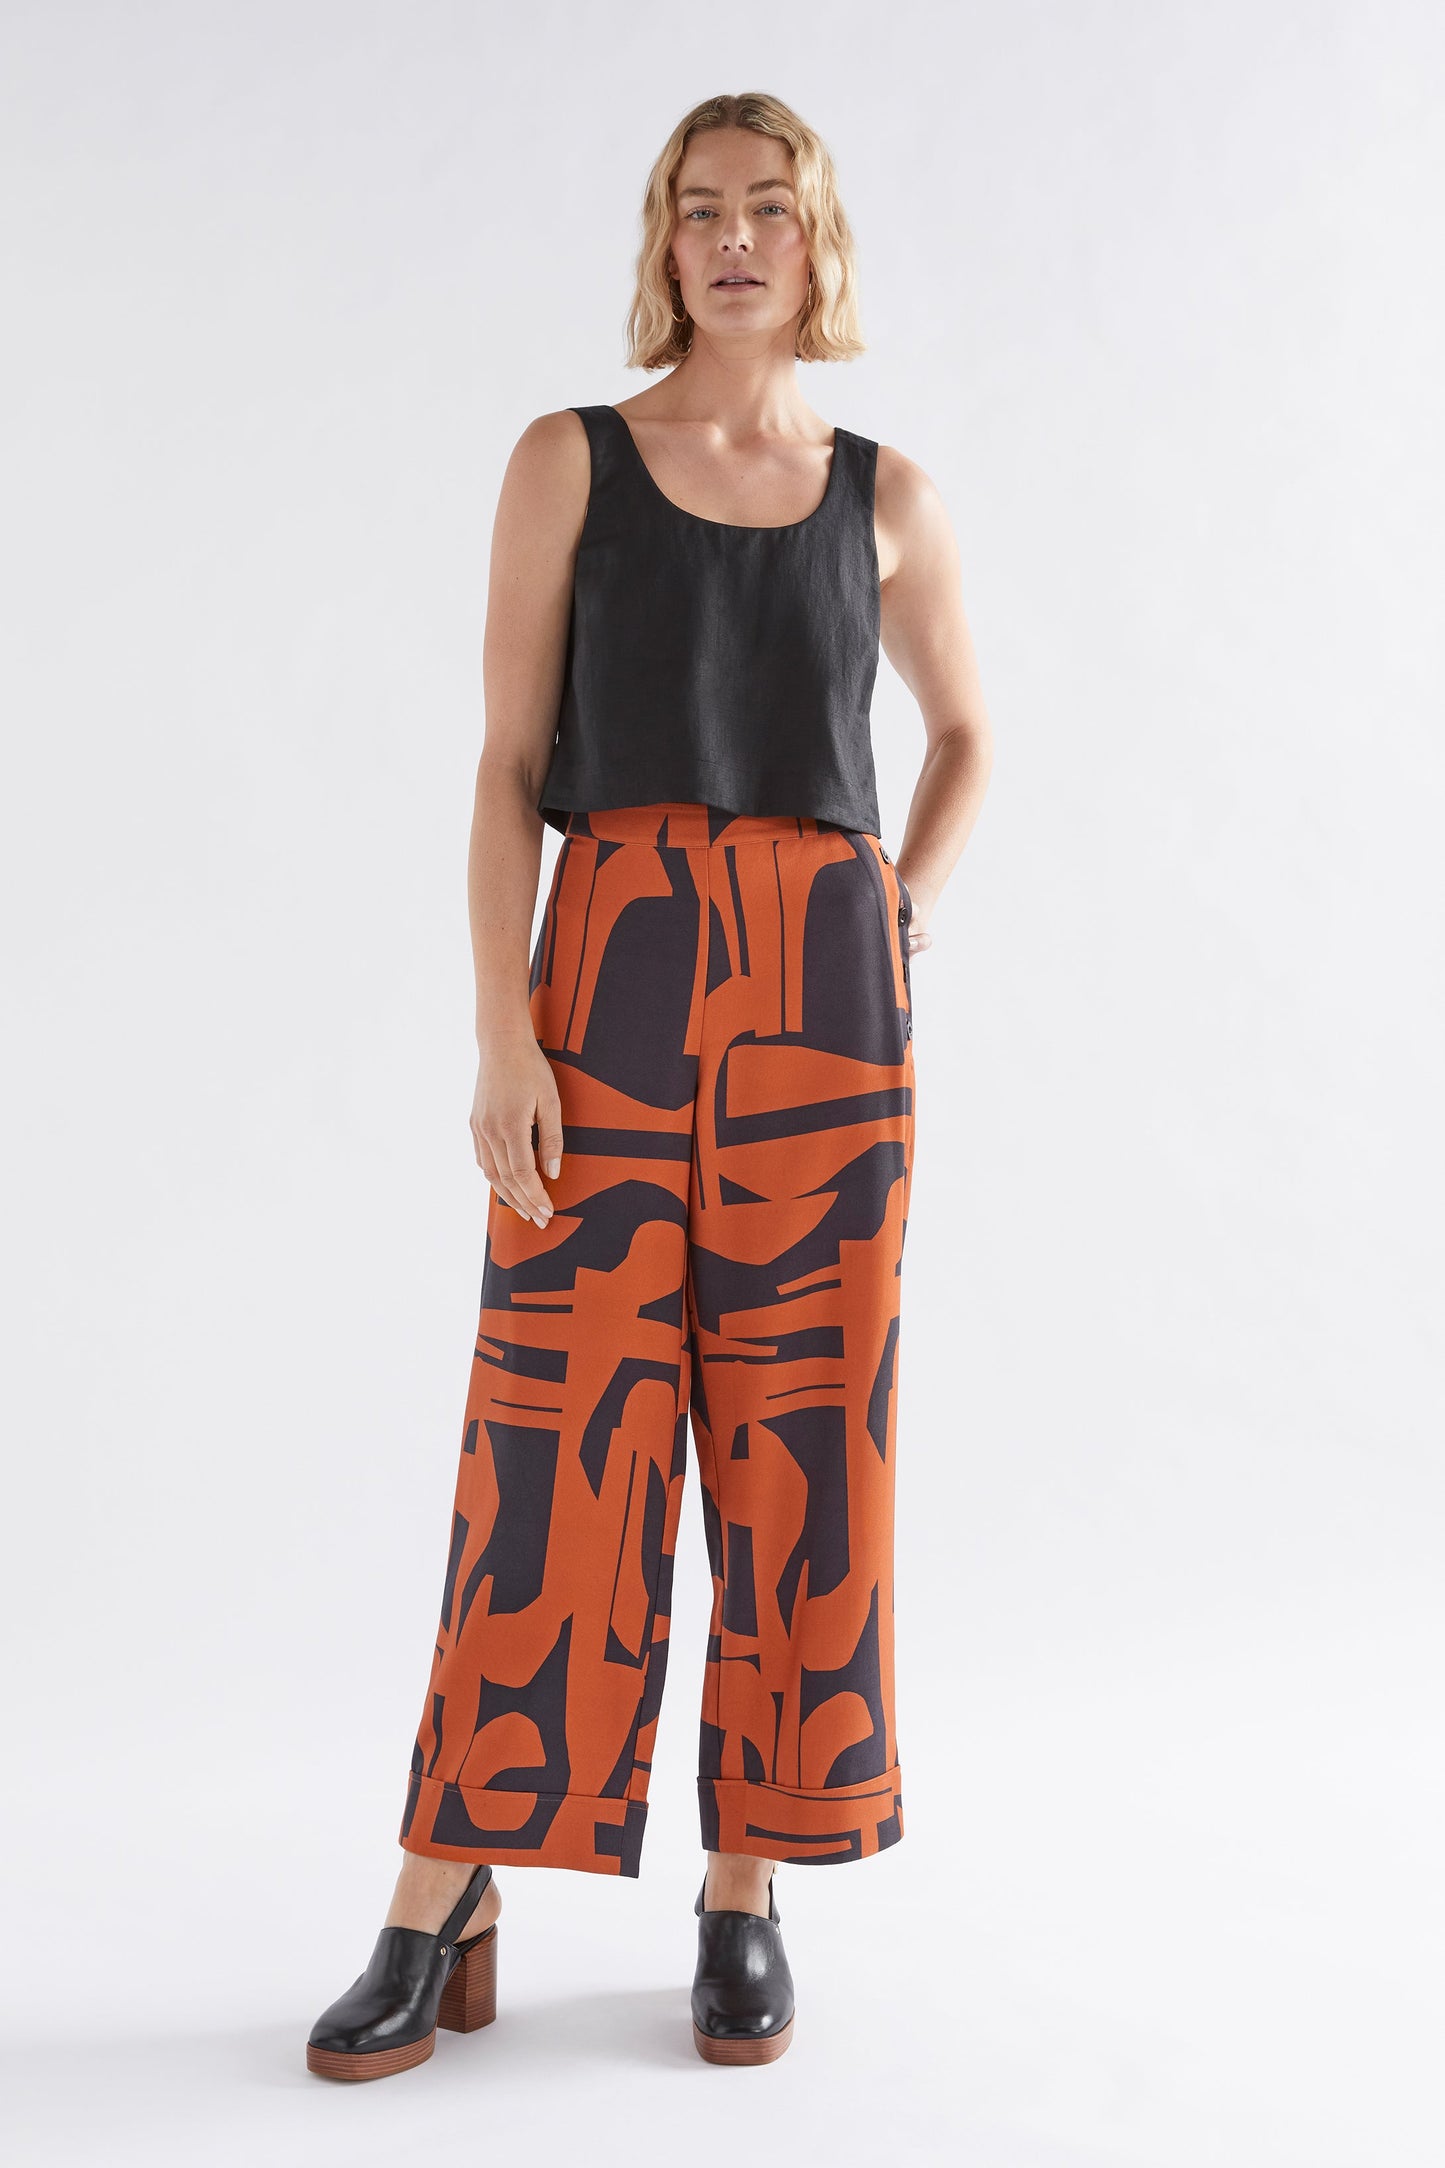 Vann Mid Rise Tailored Print Pant Model with Strom Tank | BRAQUE PRINT